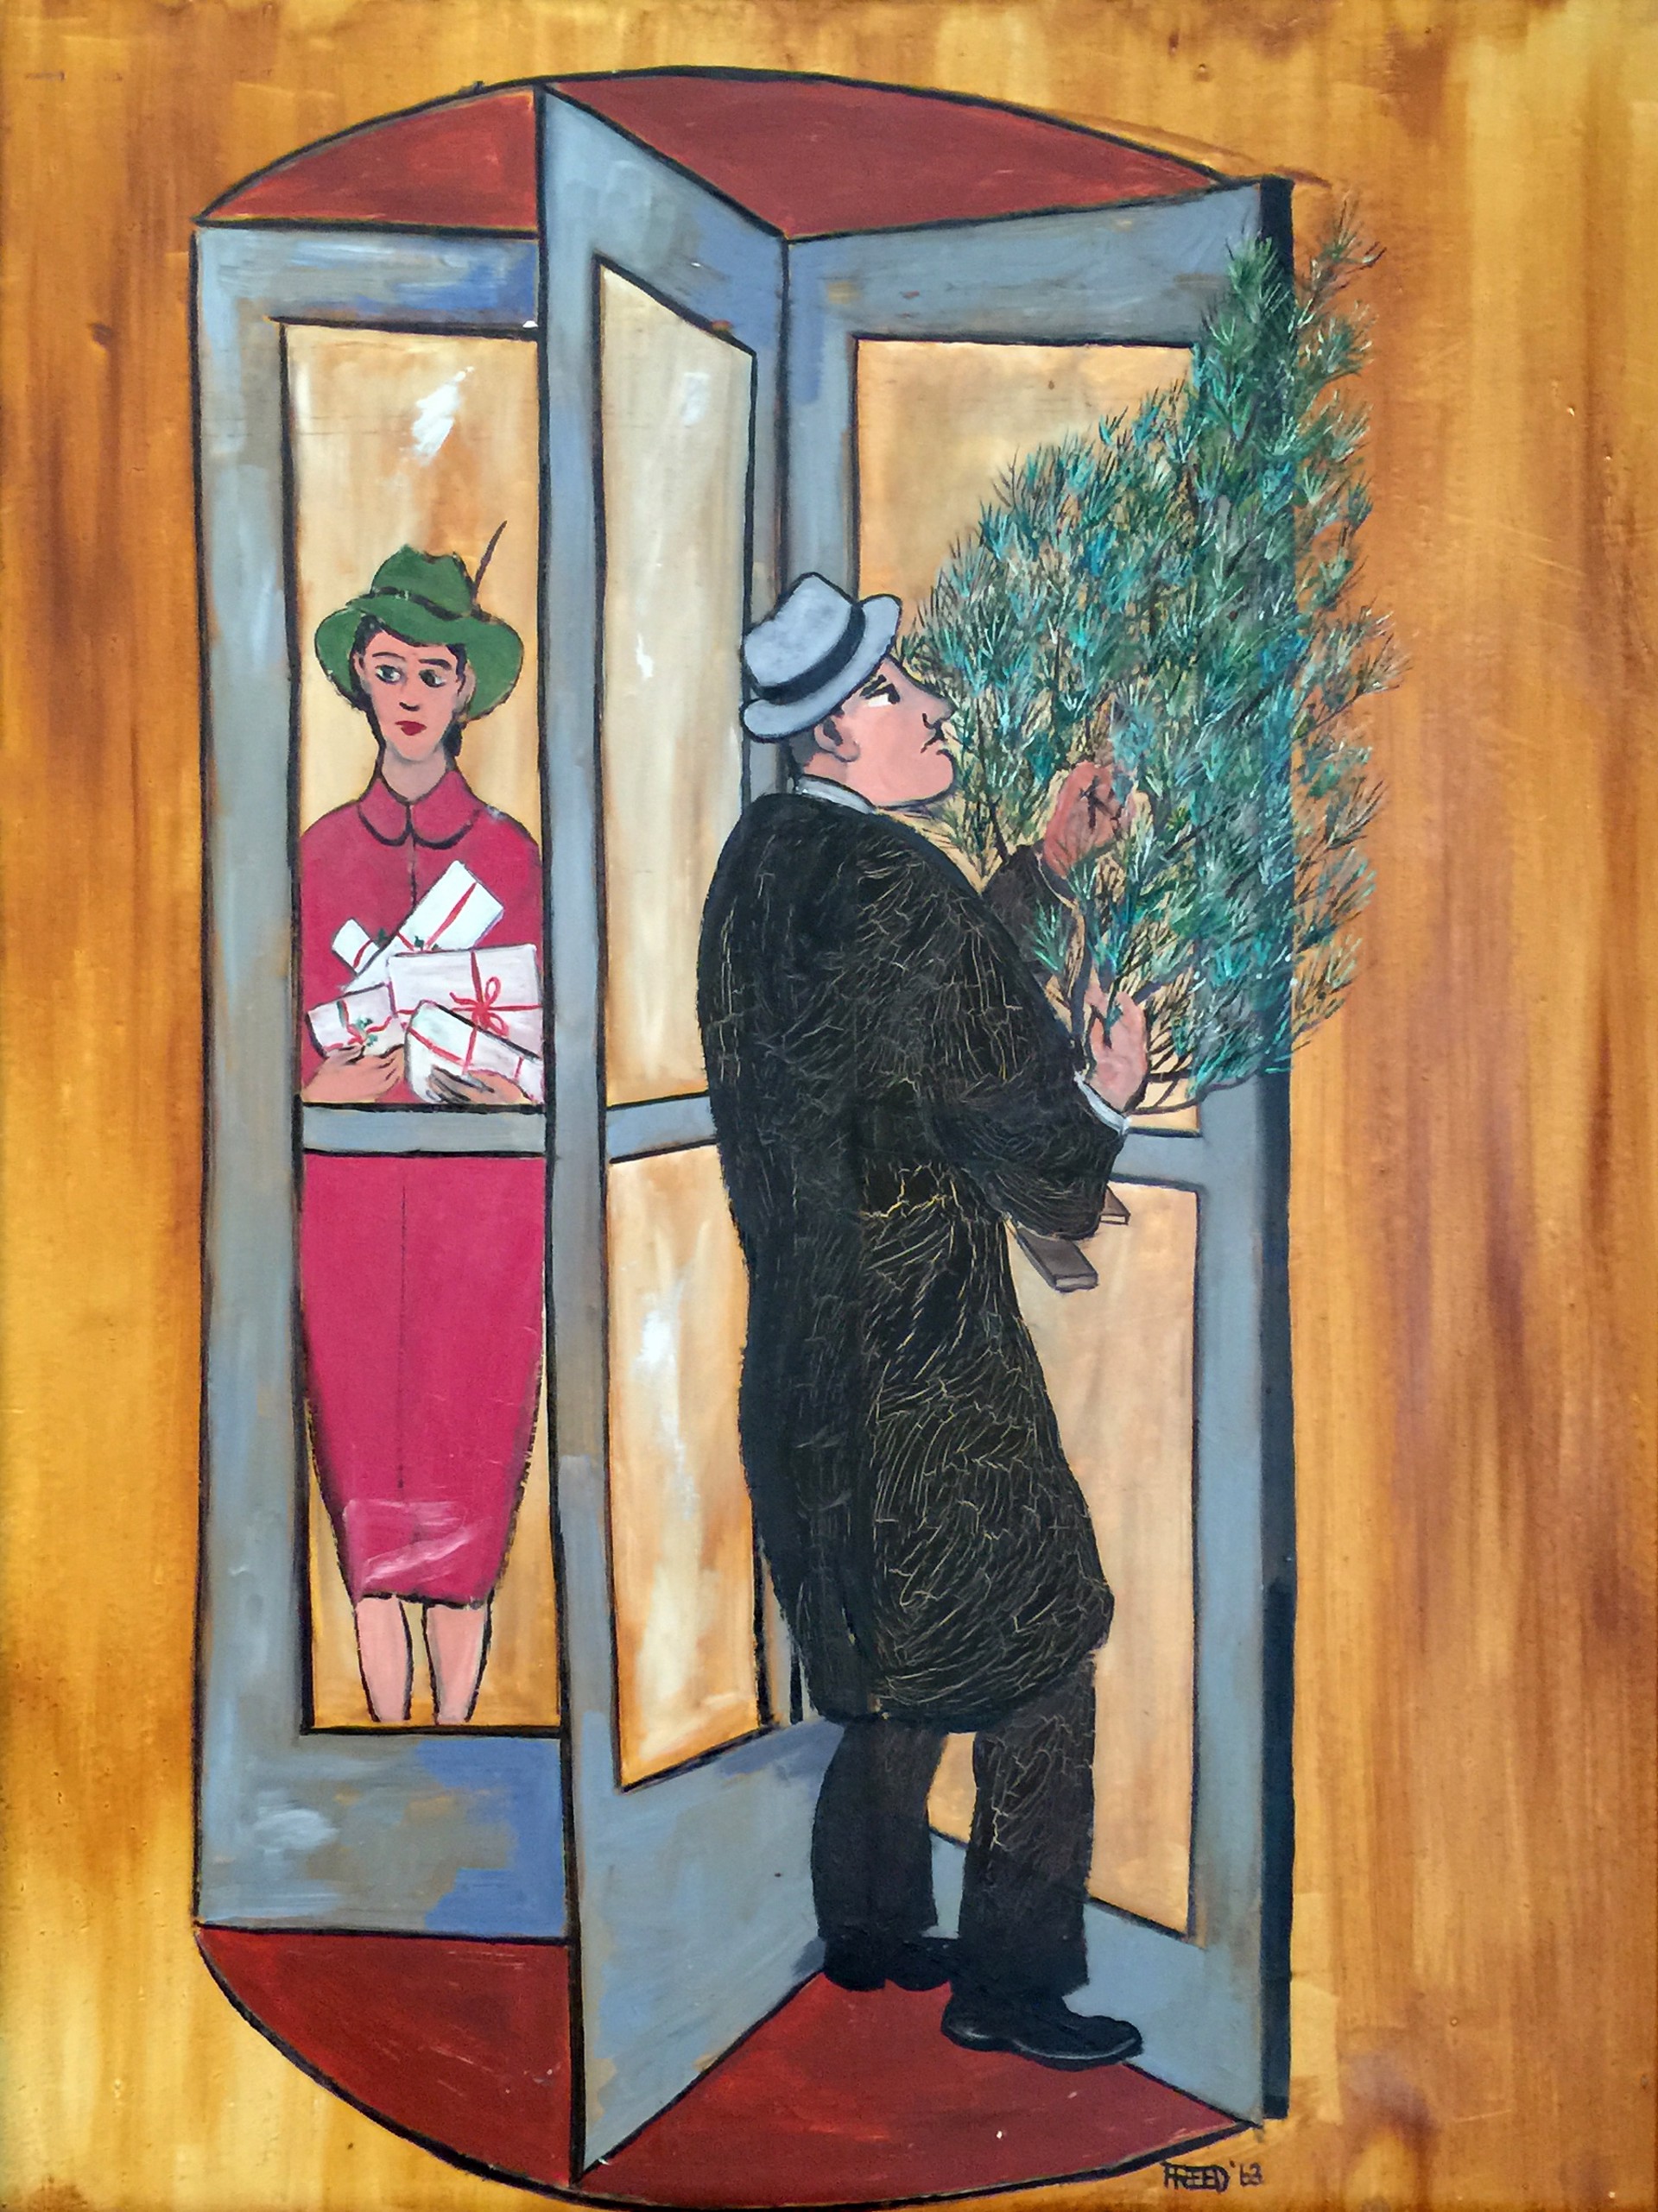 Revolving Door at Christmas by Frank Freed